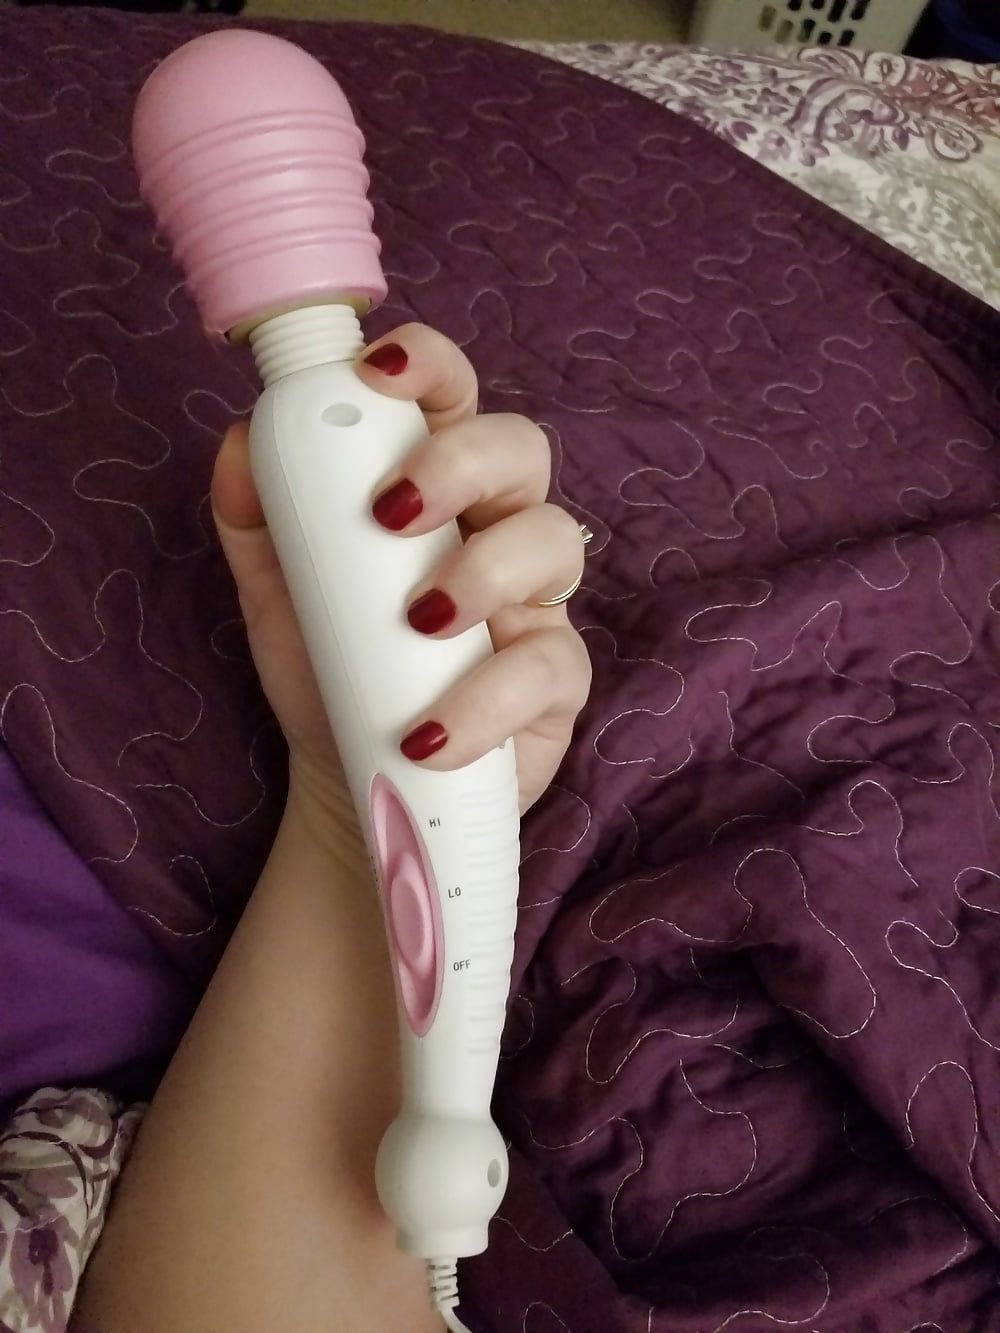 Magic Wand Playtime While Husband is Away at Work #17